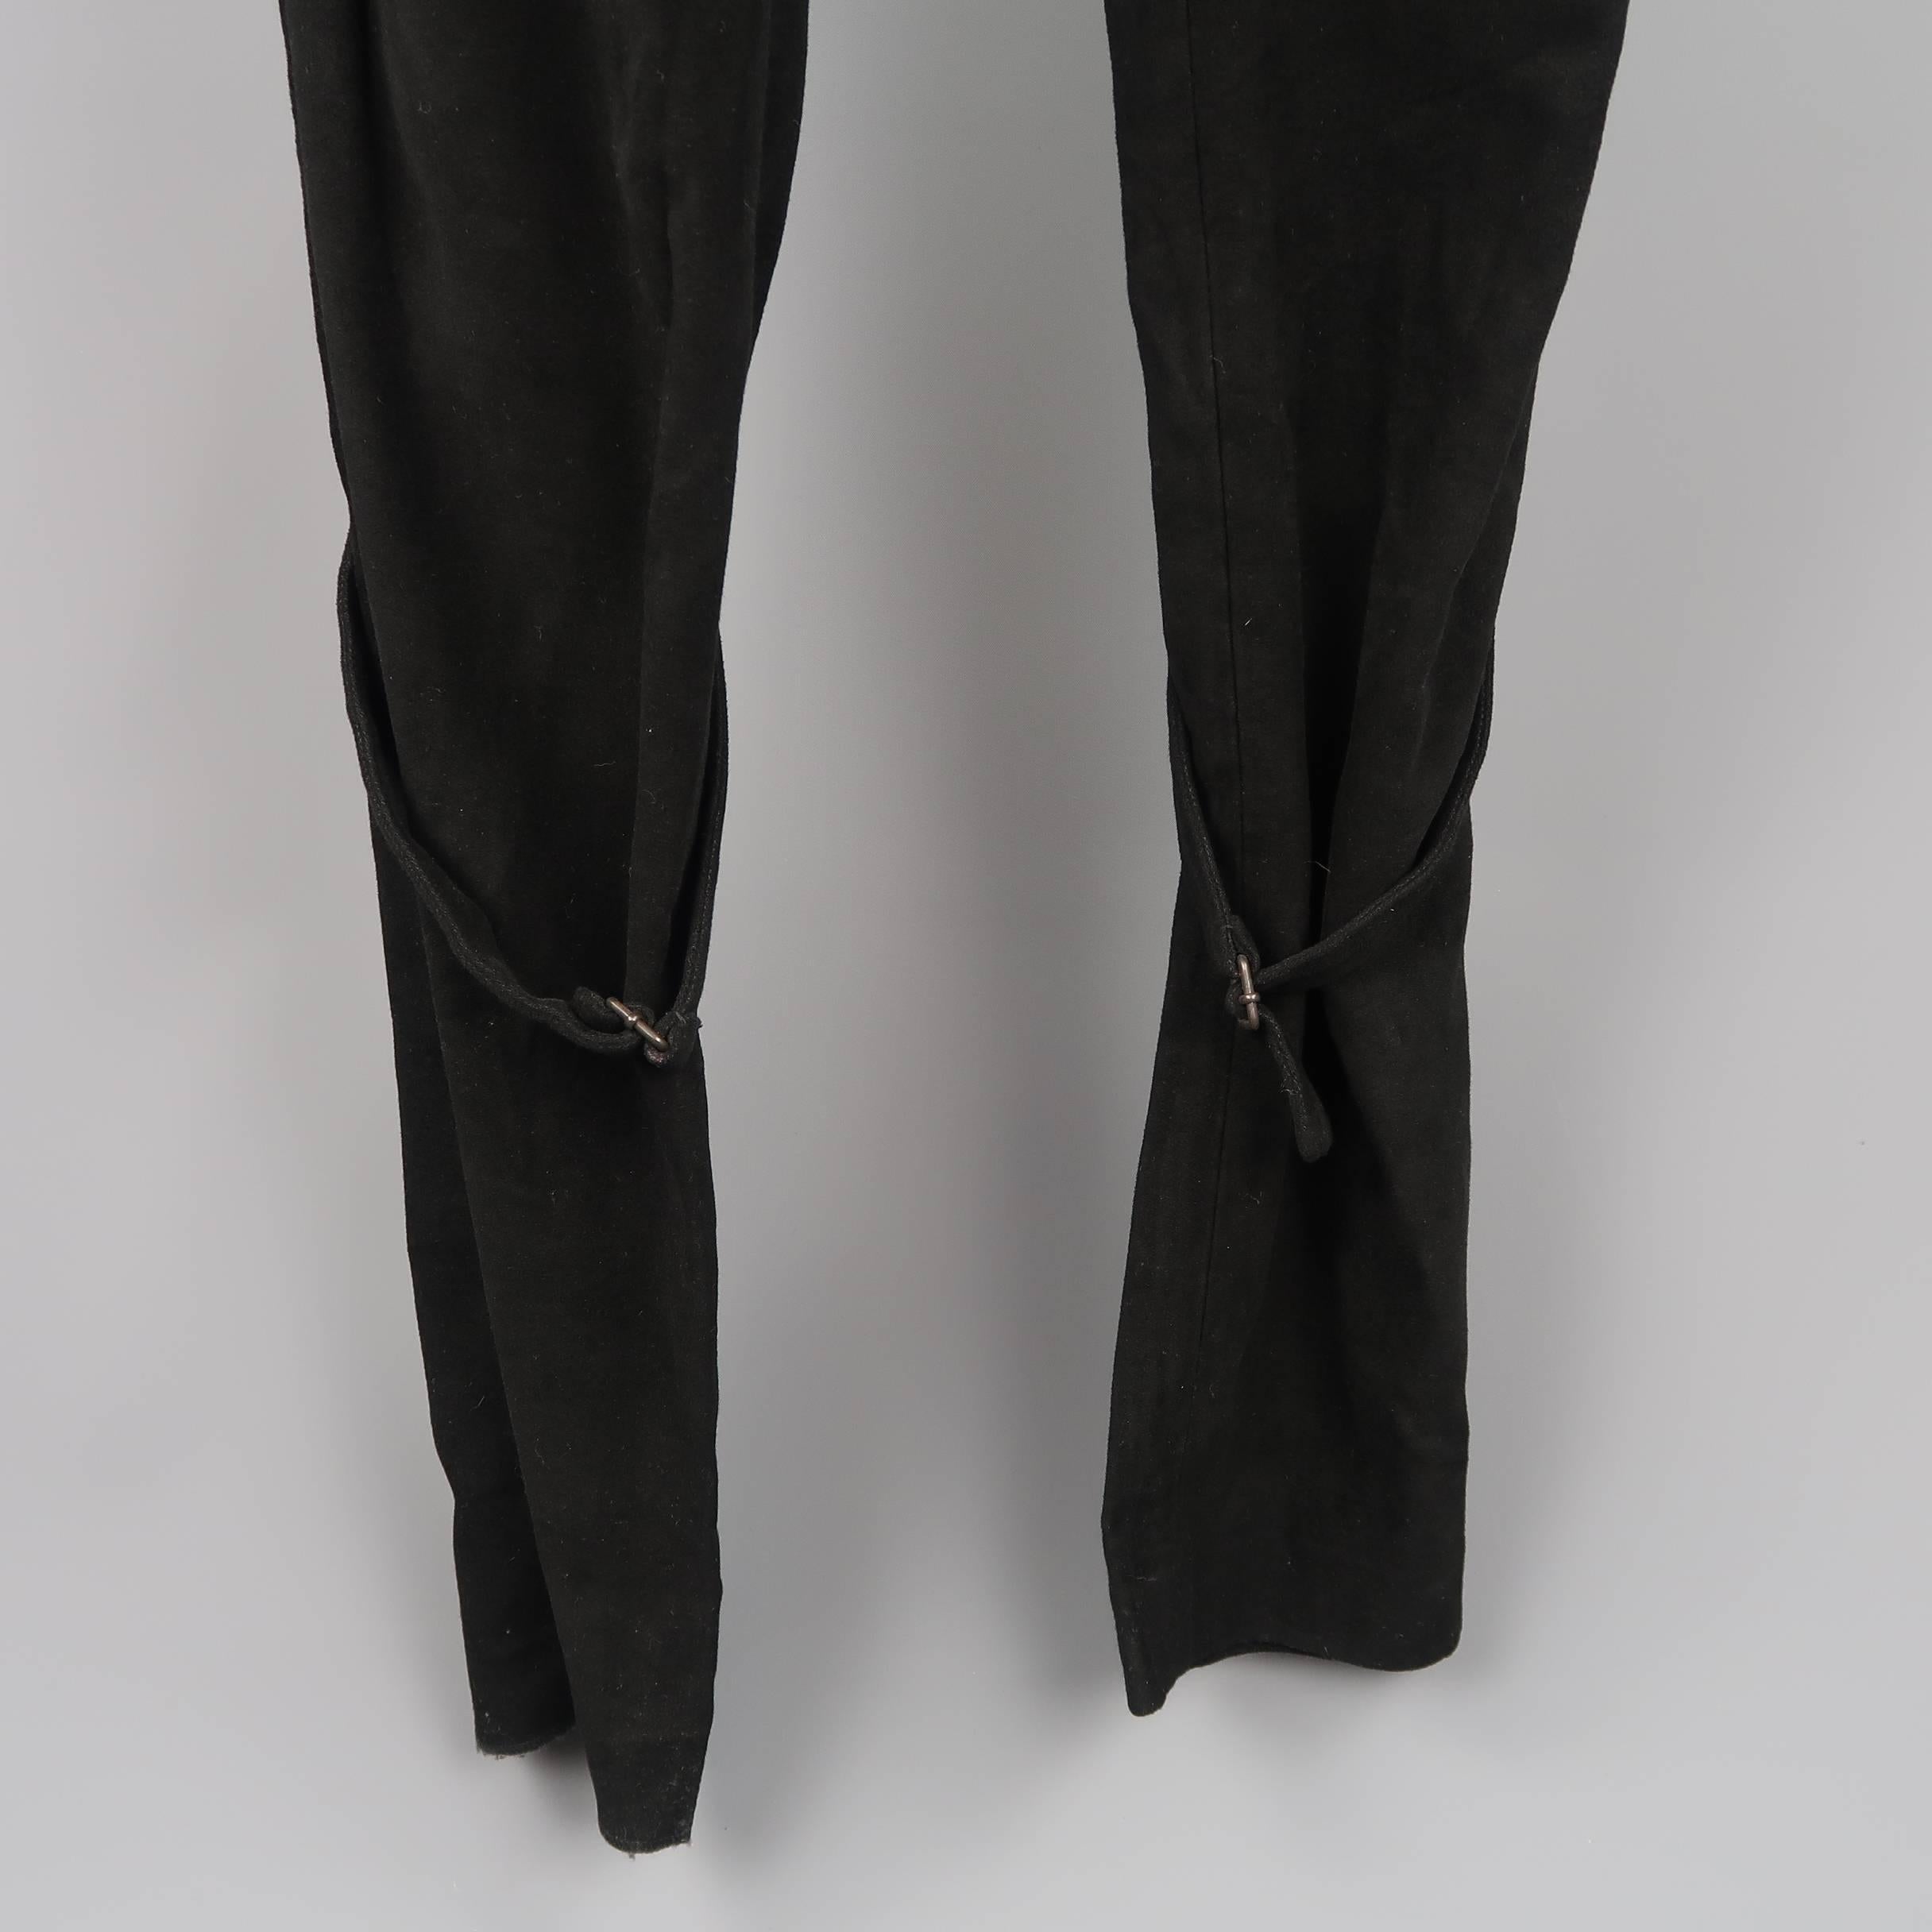 ANN DEMEULEMEESTER bondage pants come in black velvet side straps at the waistband and adjustable leg straps. One hem undone. As-is. Made in Belgium.
 
Good Pre-Owned Condition.
Marked: S
 
Measurements:
 
Waist: 33 in.
Rise: 9 in.
Inseam: 36 in.
